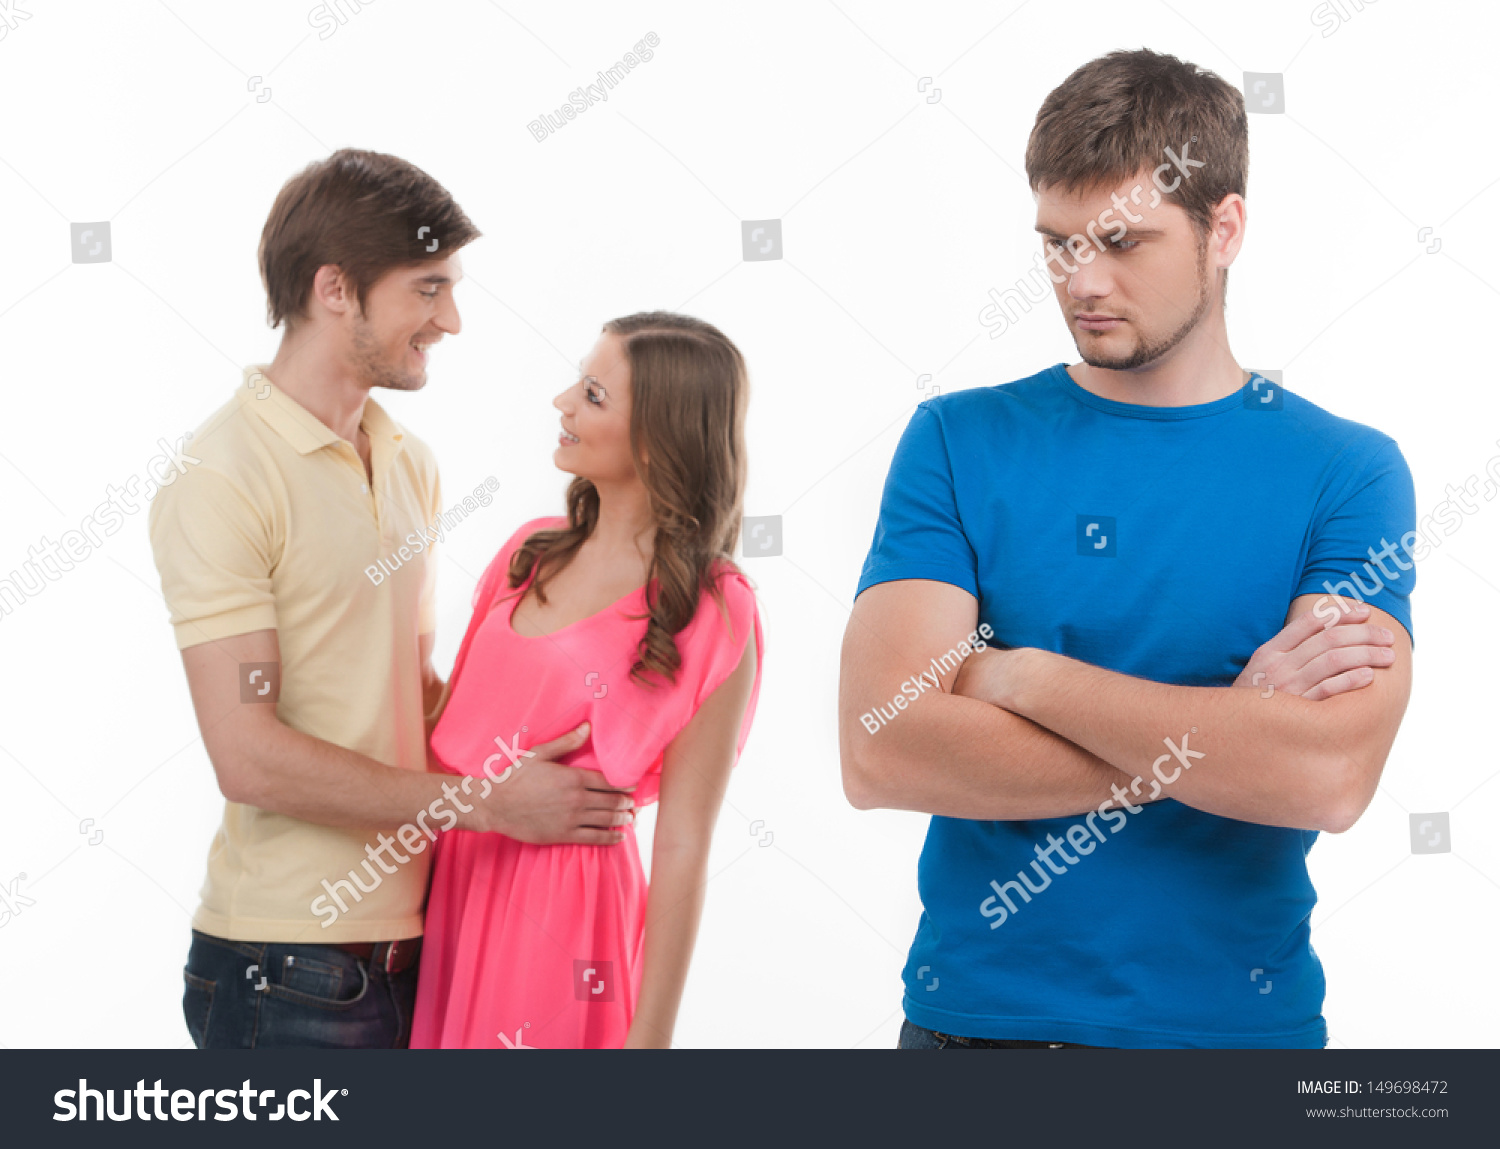 stock-photo-jealousy-young-sad-man-standing-with-his-arms-crossed-while-another-man-and-woman-hugging-on-149698472.jpg